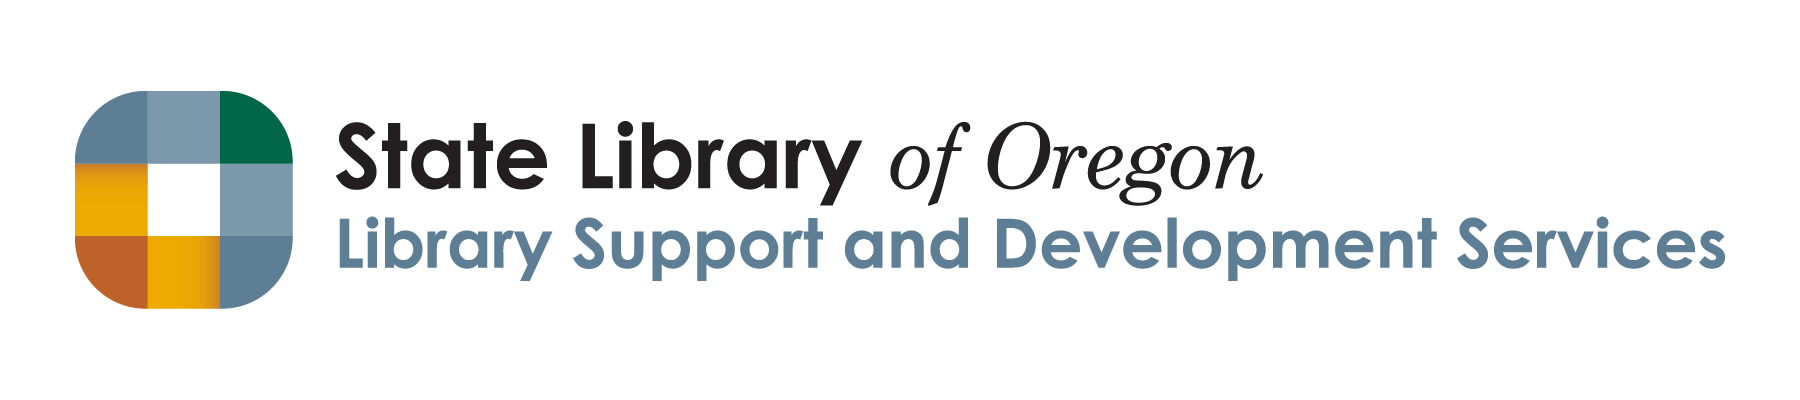 State Library of Oregon, Library Support and Development Services logo